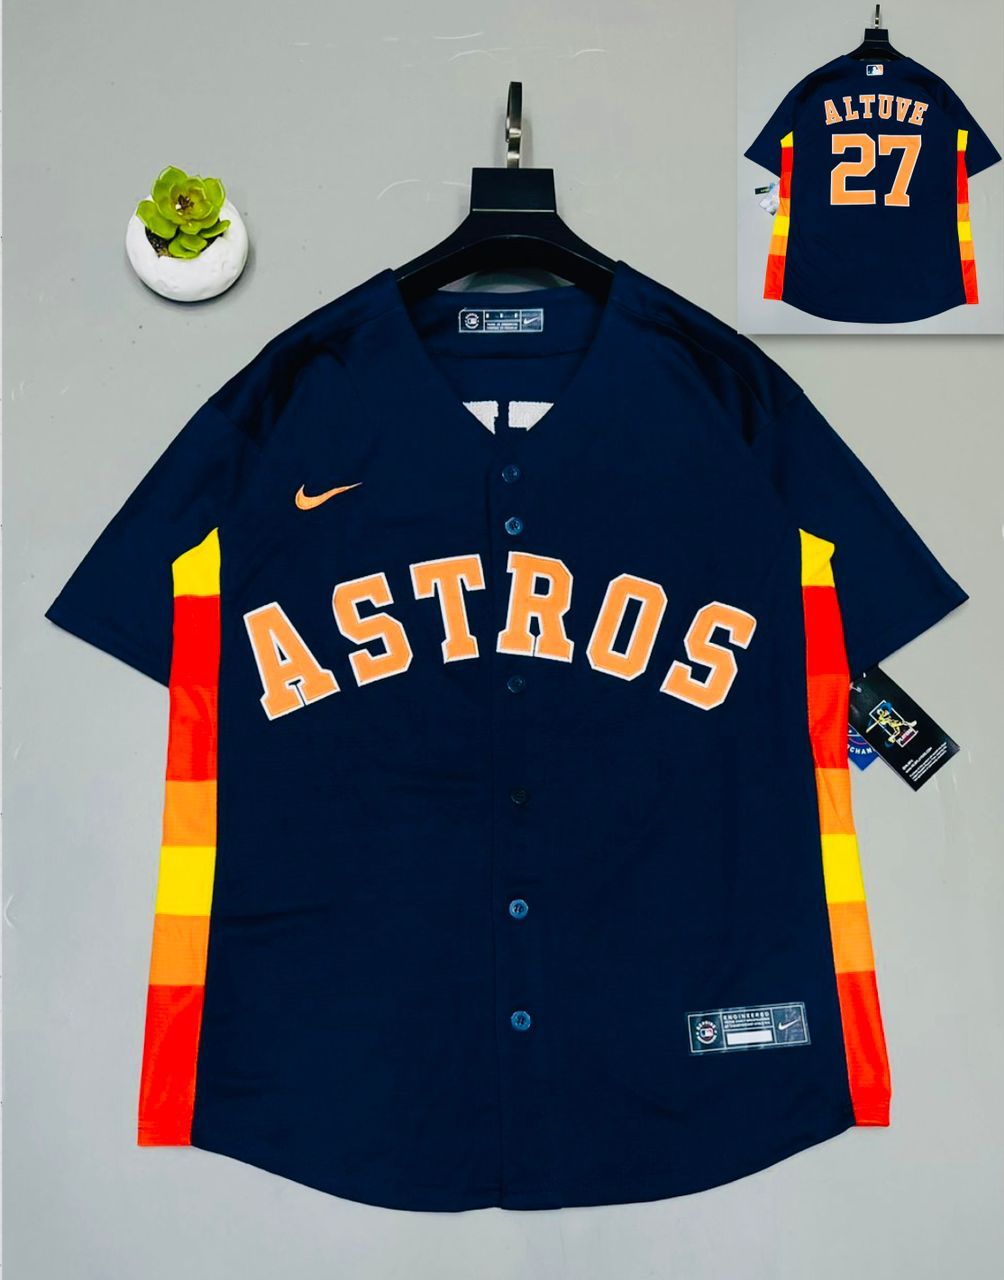 Officially Licensed 202324 MLB Kits Shirts Jerseys  Tops  Sky Sports  Online Shop